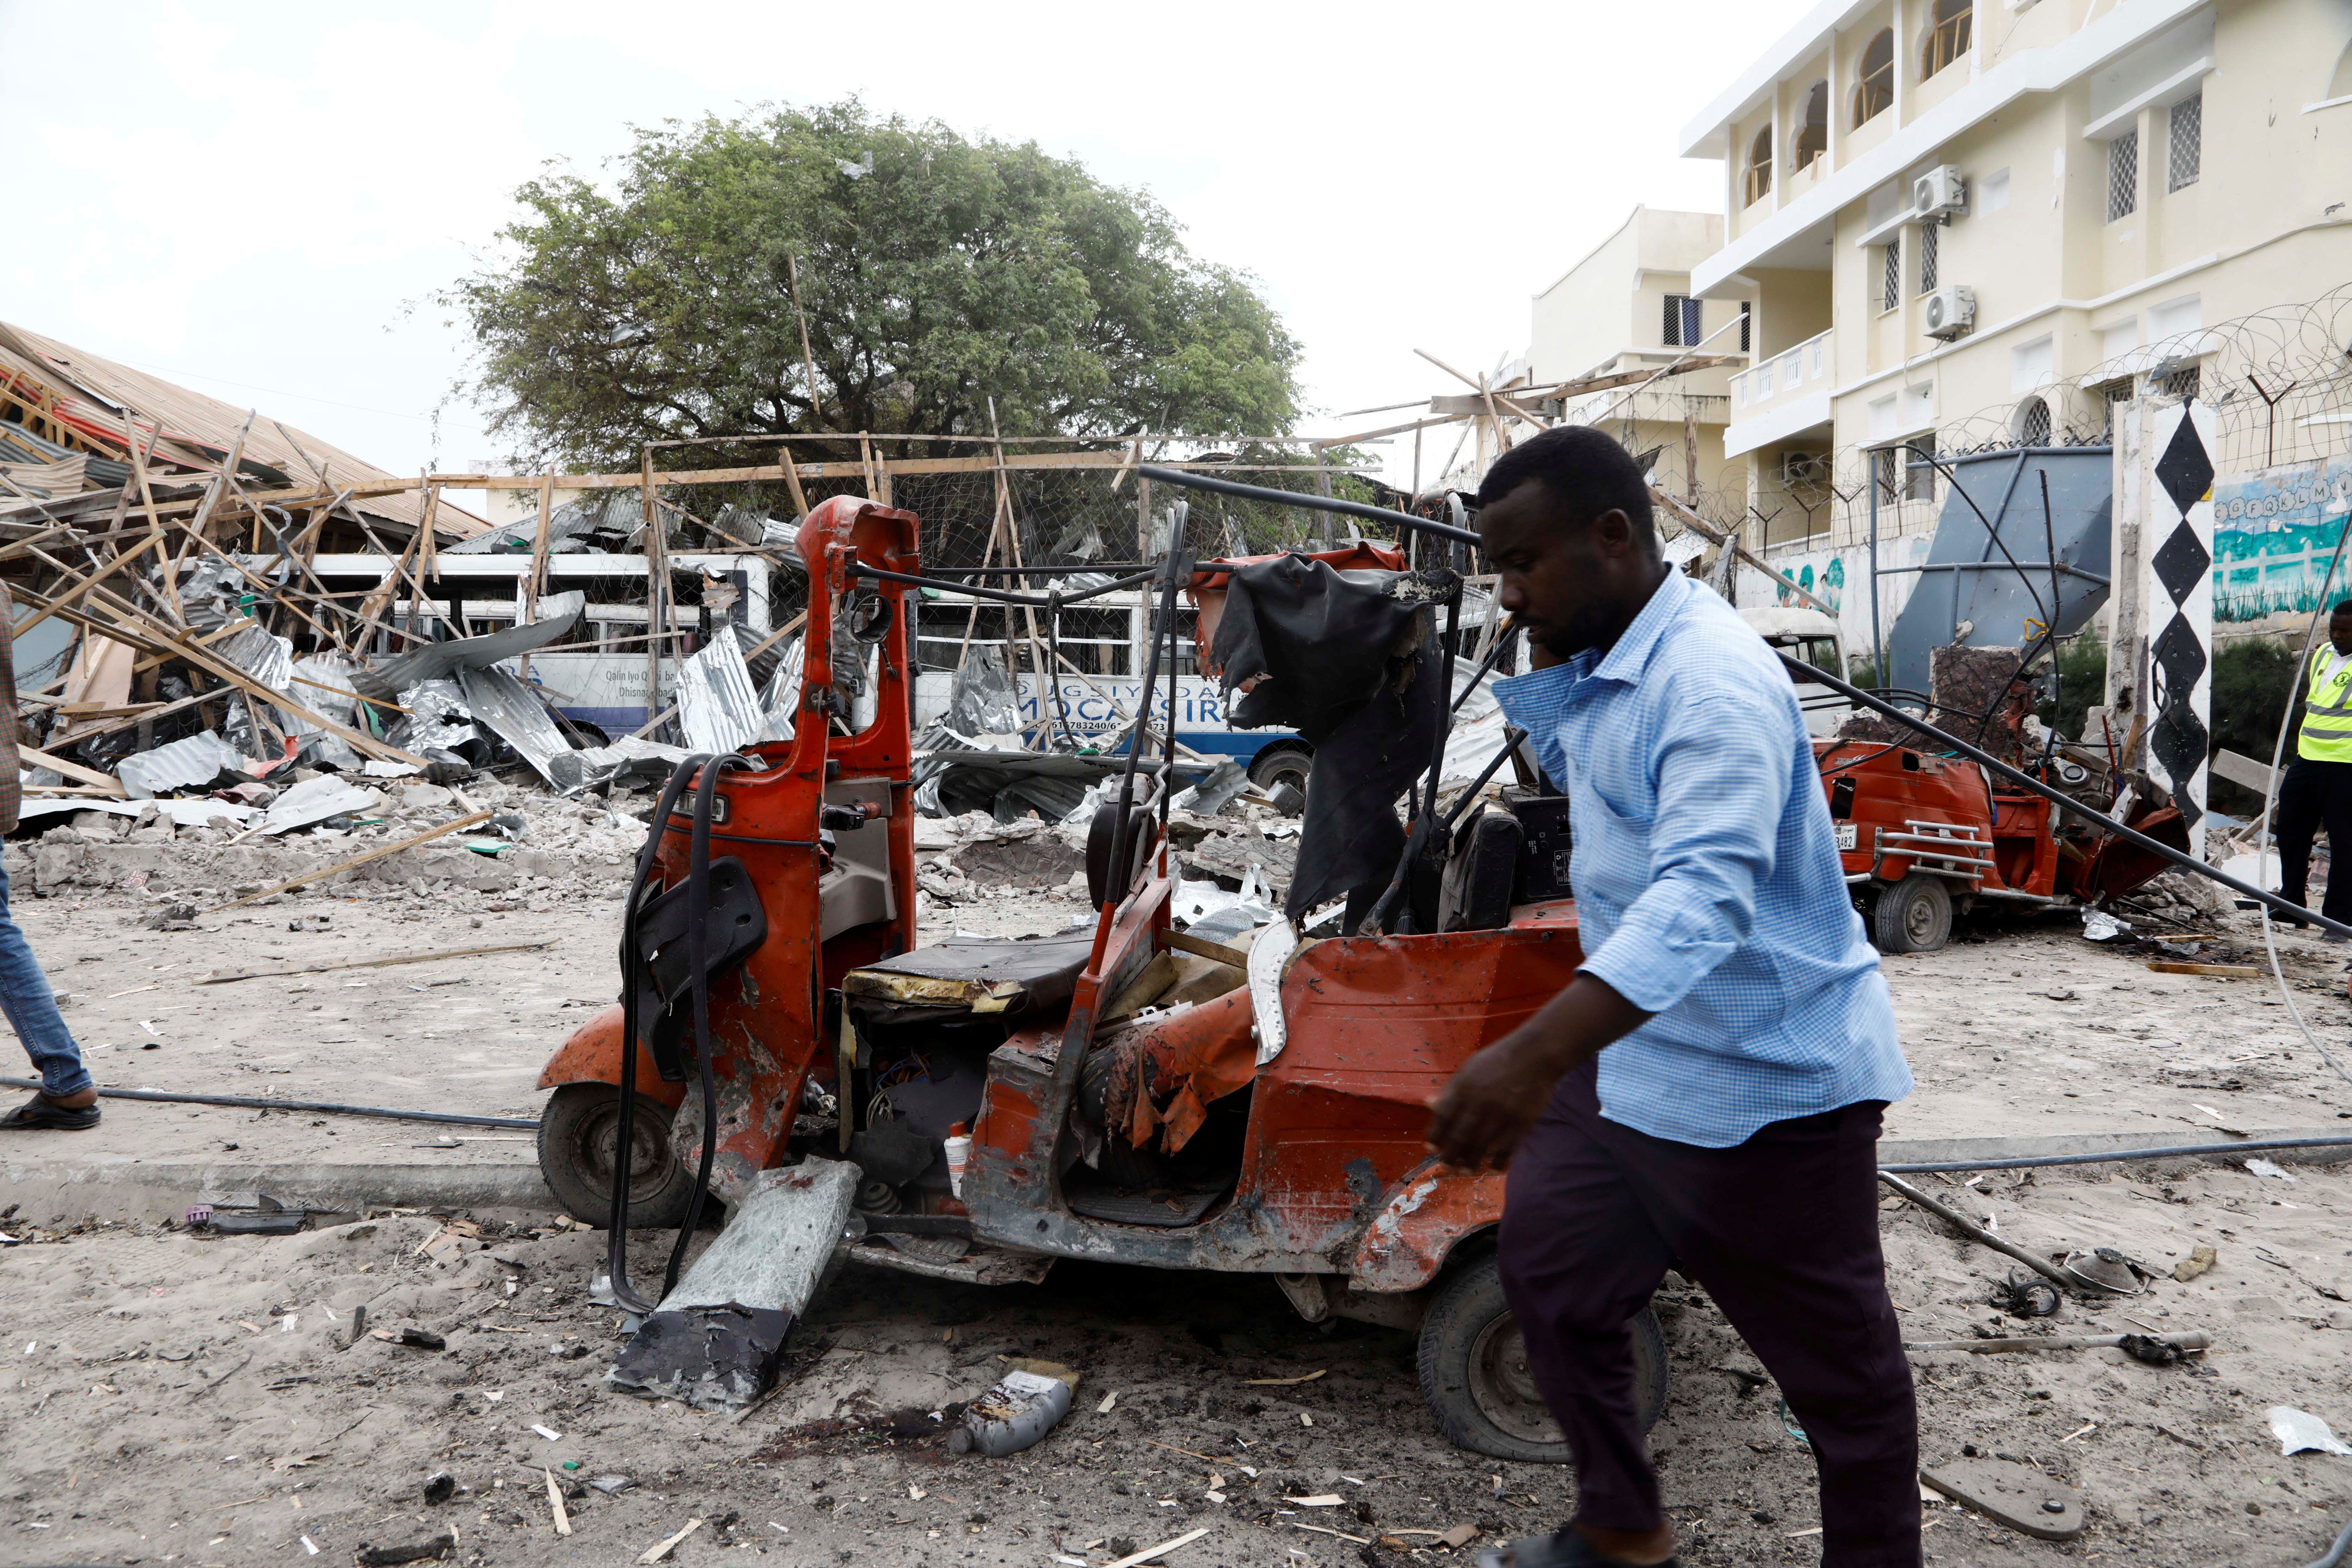 A civilian walks past the wreckages of vehicles and the debris of classrooms after a car exploded in a suicide attack near Mucassar primary and secondary school in Hodan district of Mogadishu